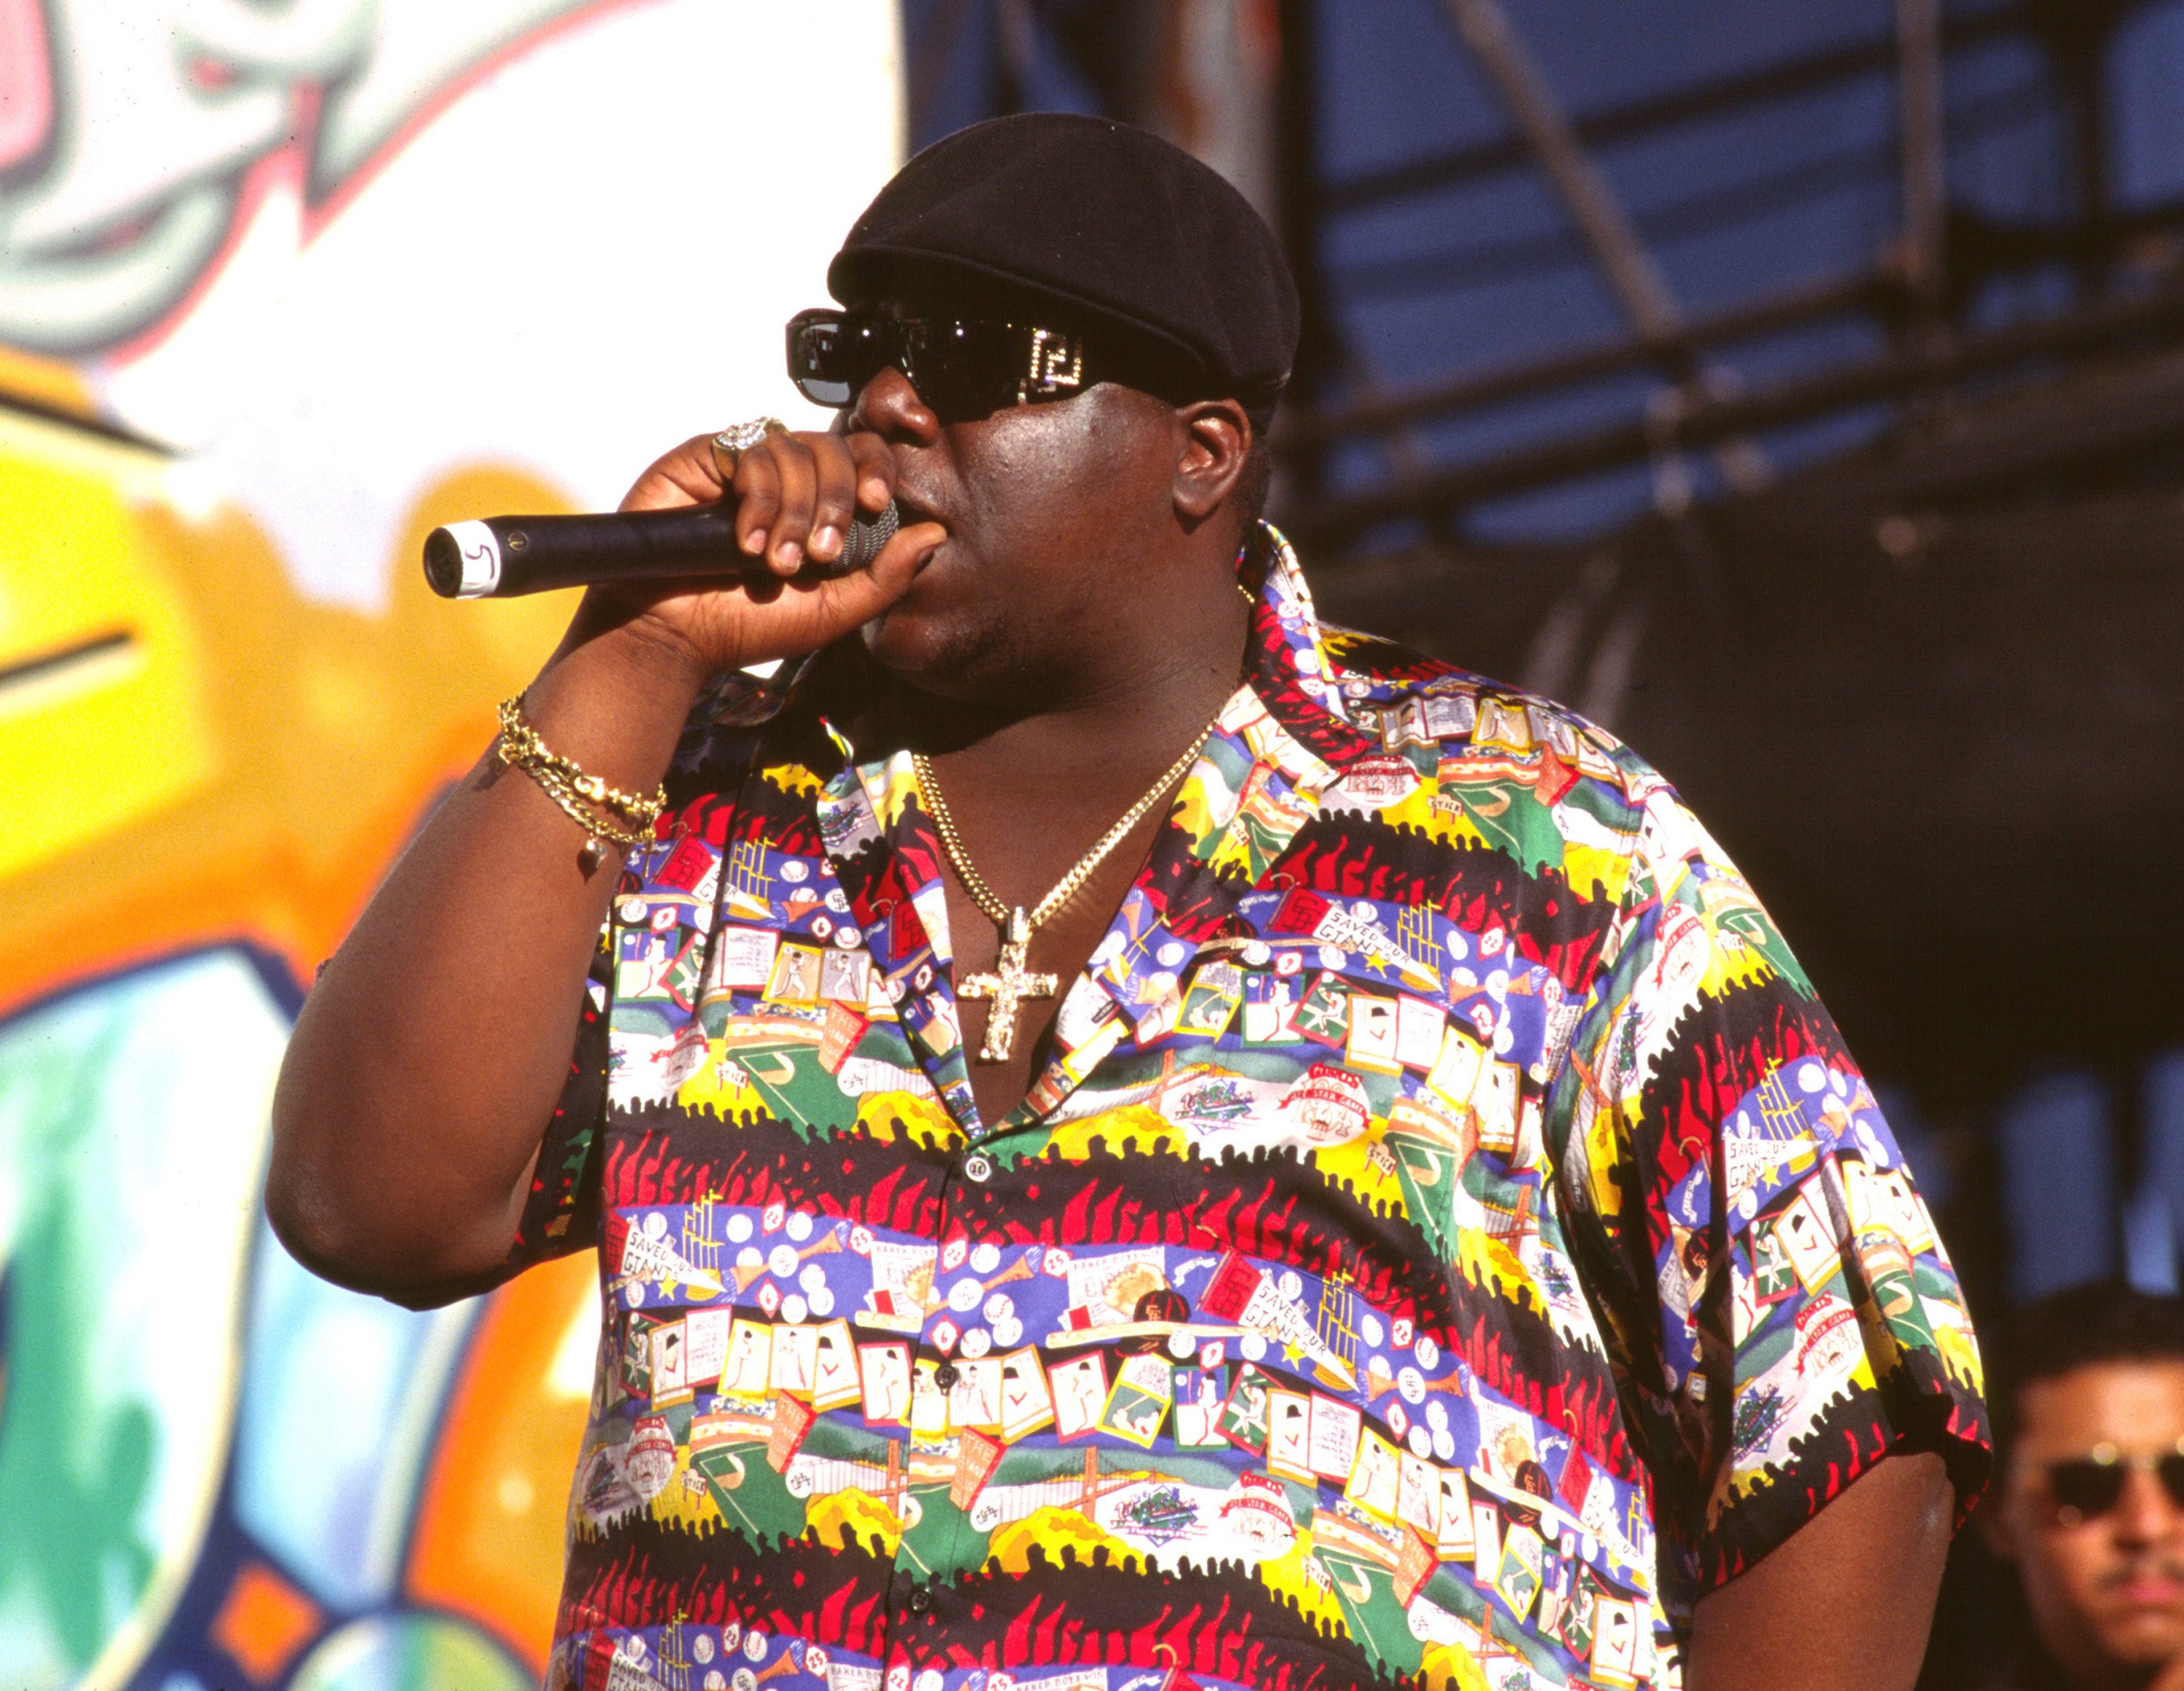 The Notorious B.I.G., who sampled Chuck D in his song 'Ten Crack Commandments', performing on stage